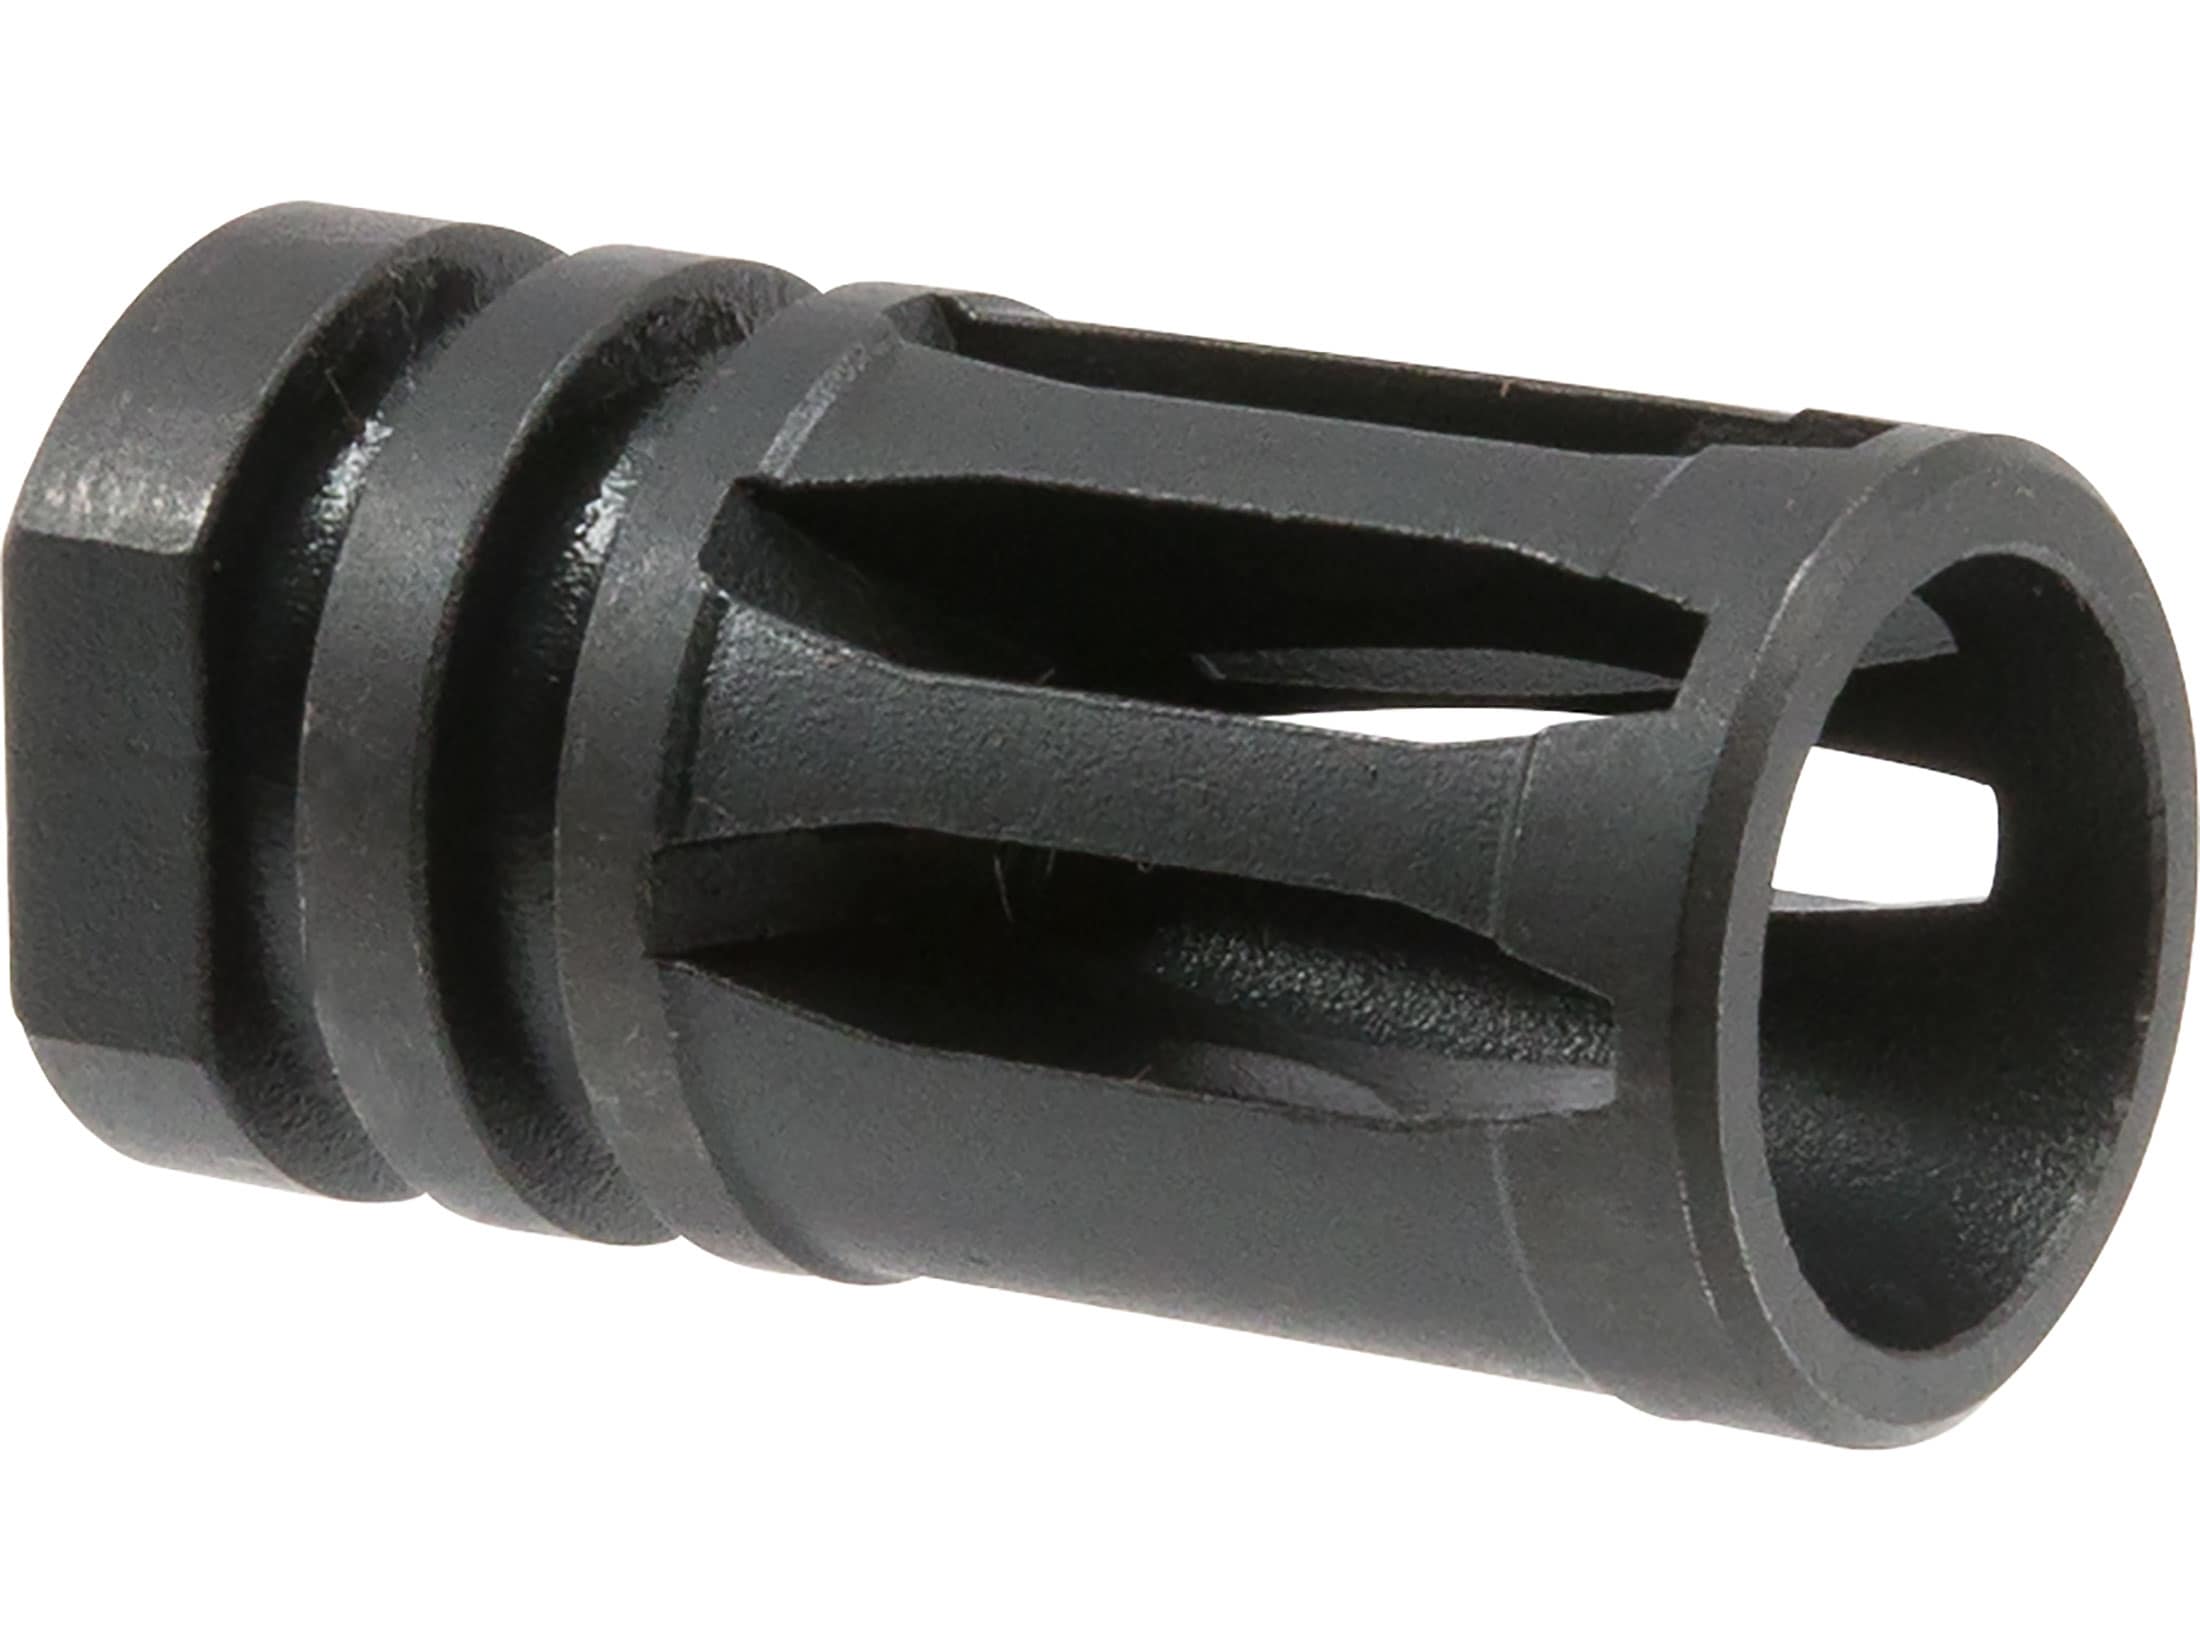 Related image of A2 Flash Hider.